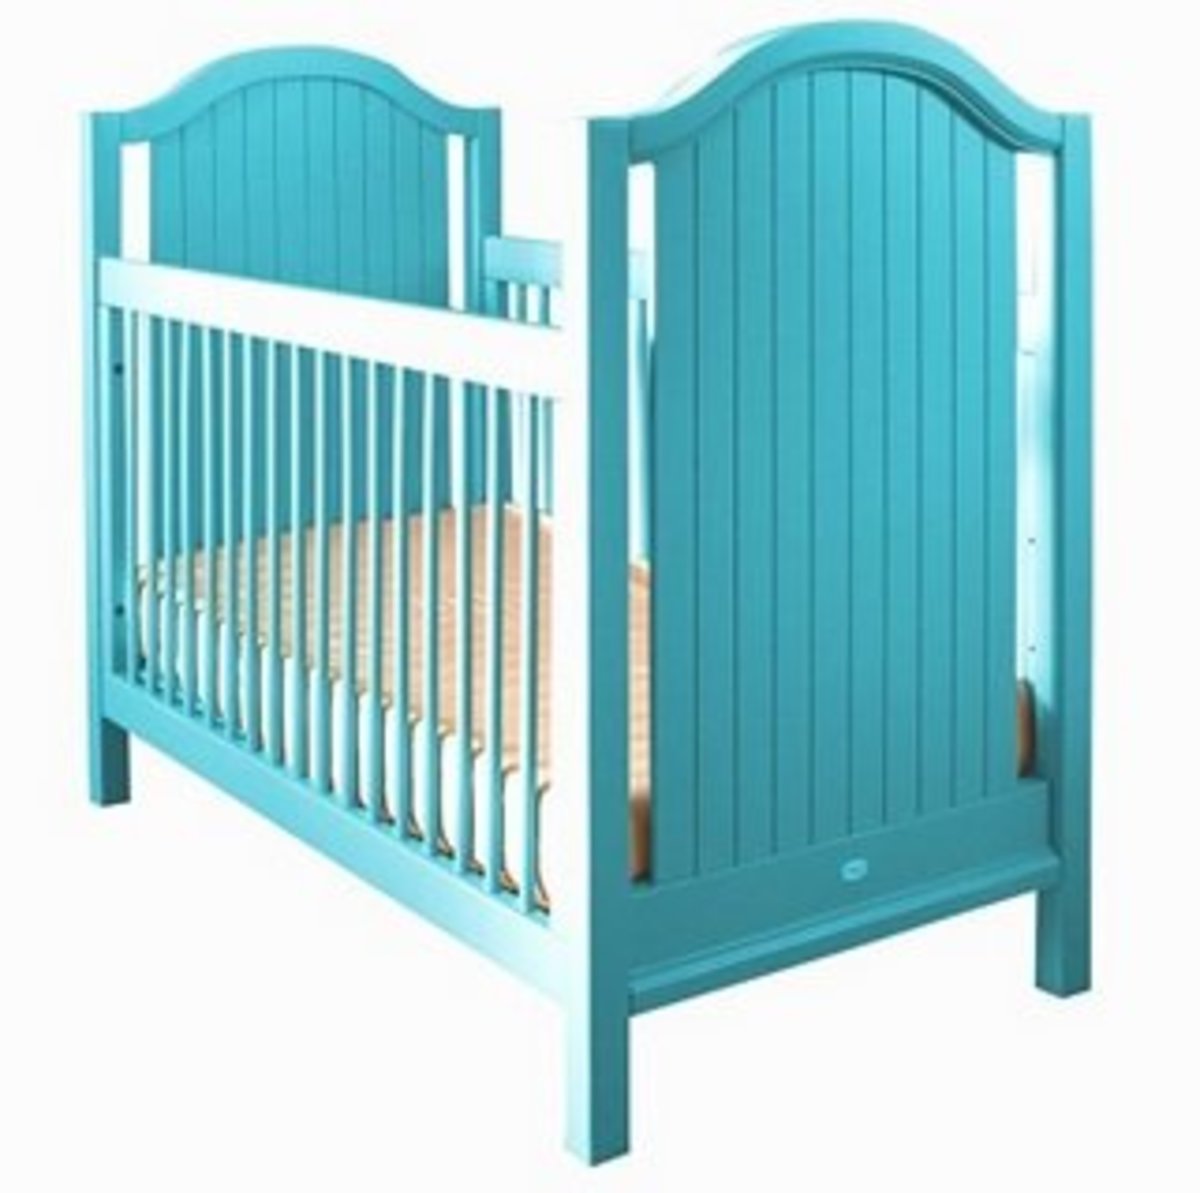 5 Beautiful Baby Cribs Made in the USA | hubpages